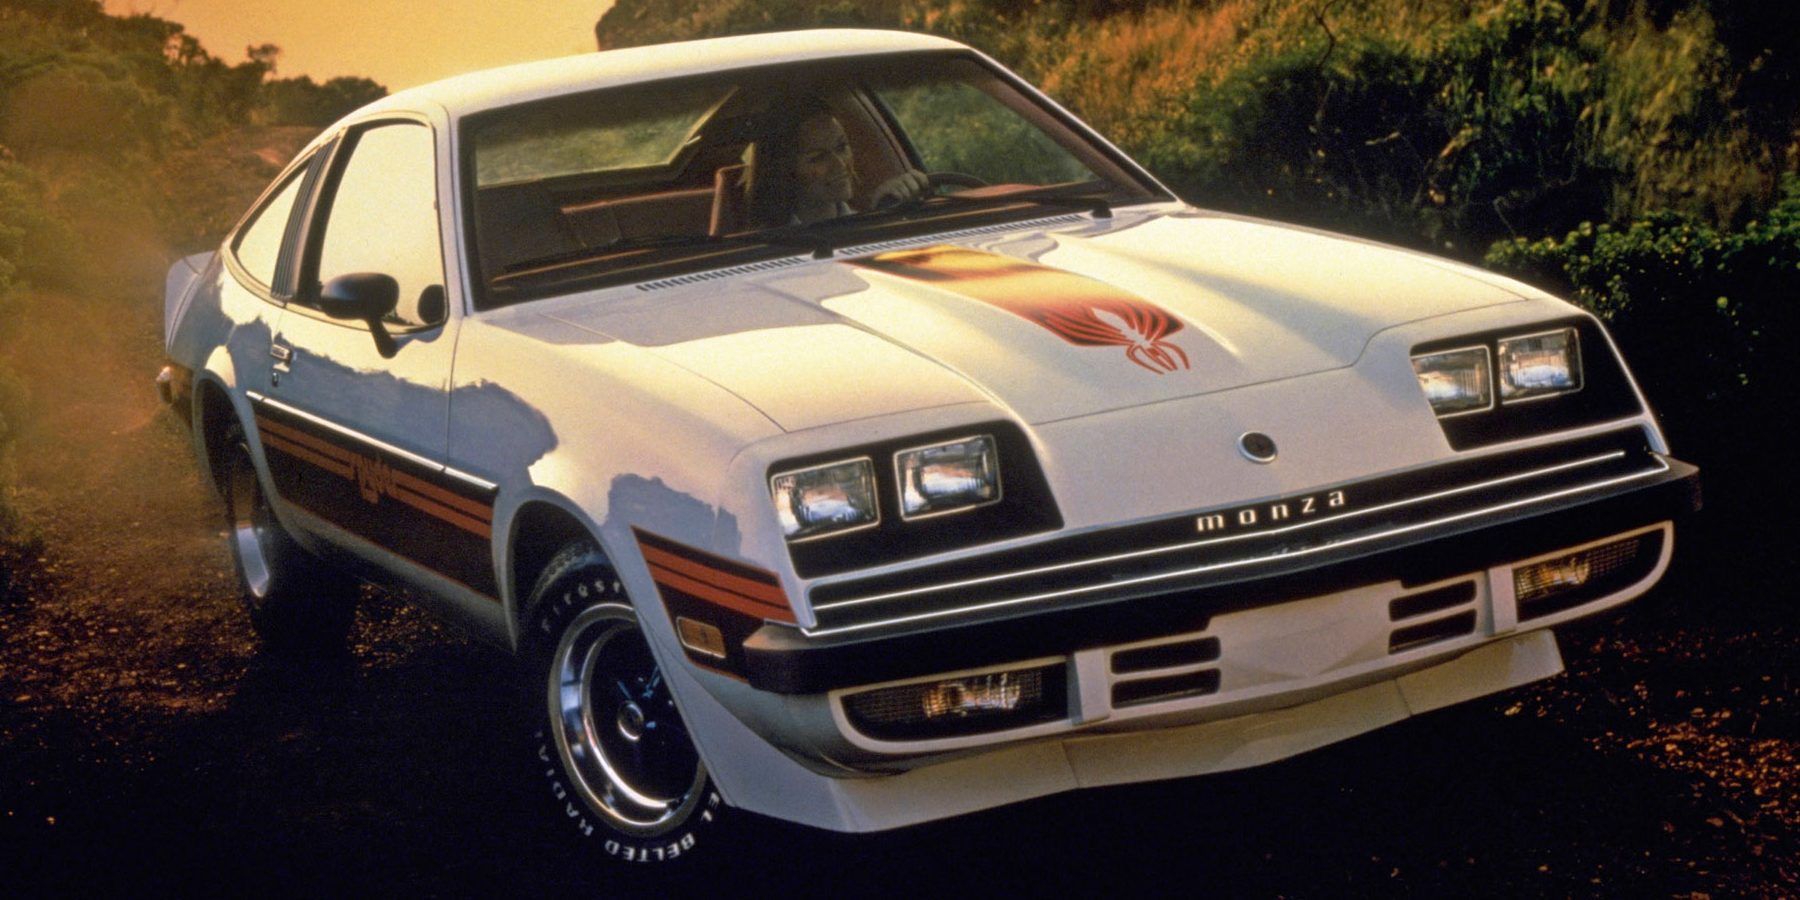 Chevy Monza 1977 White girl driving